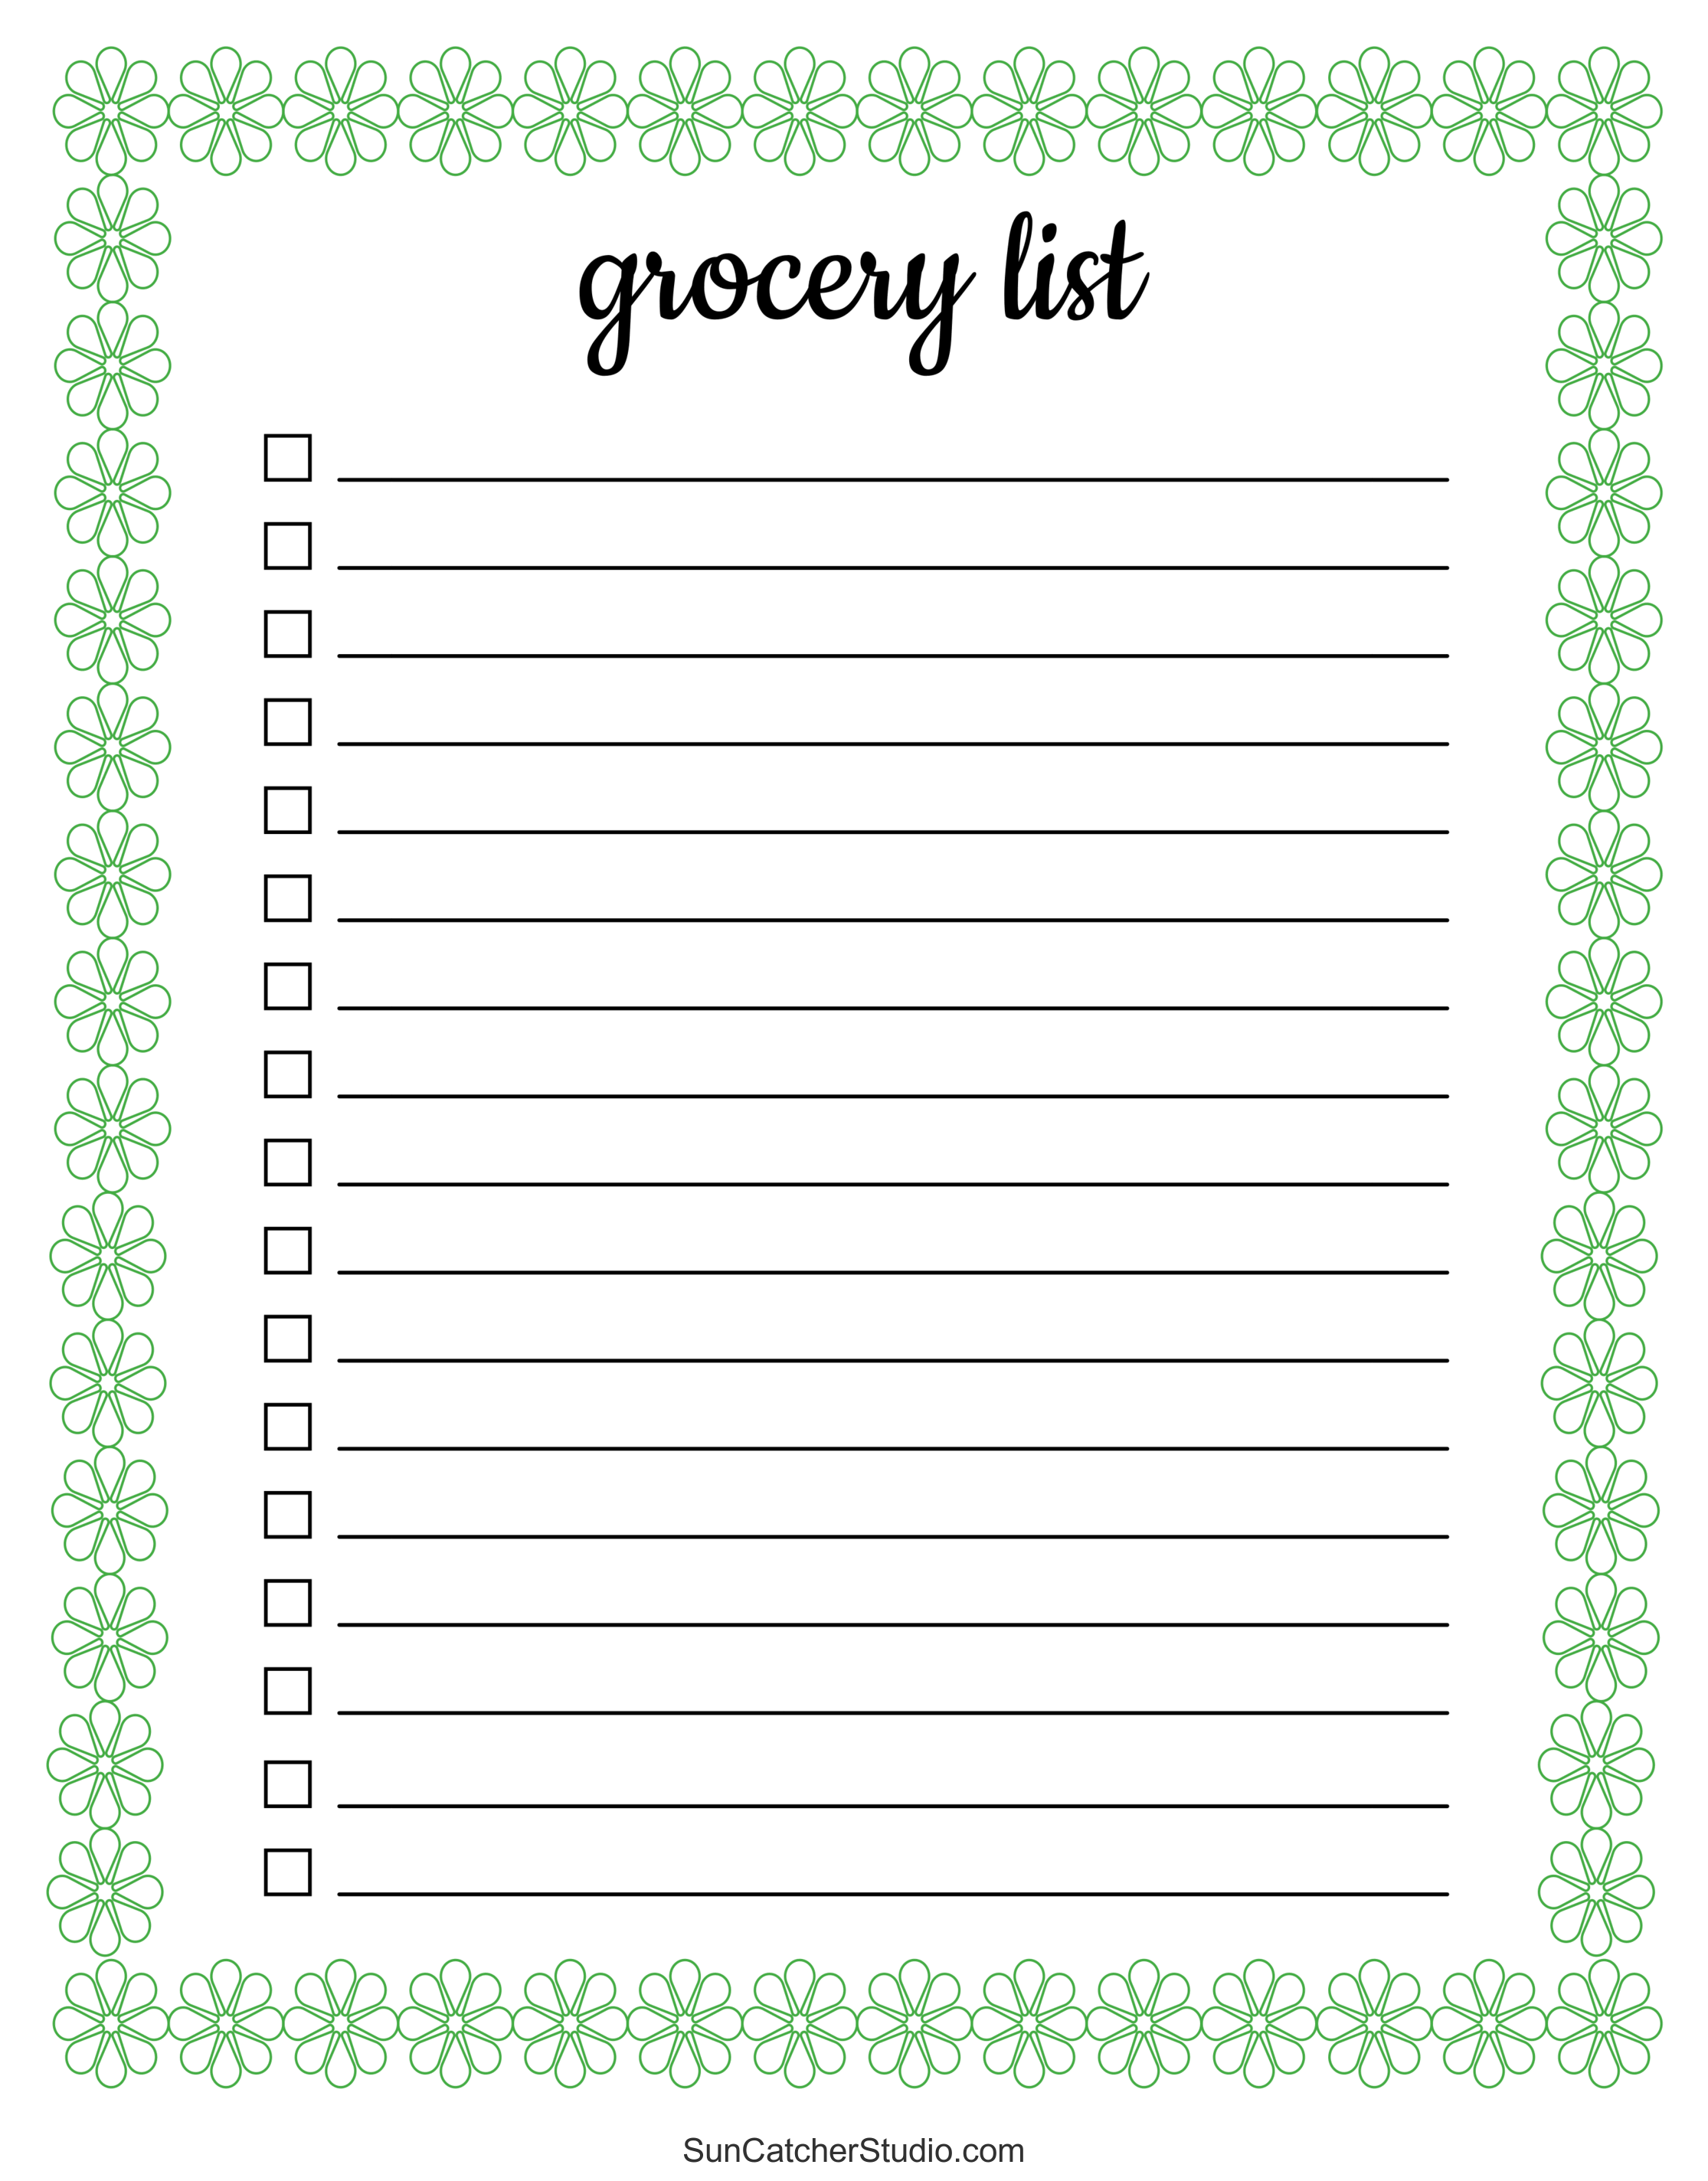 Free Printable Grocery List Templates in PDF, PNG and JPG Formats · InkPx